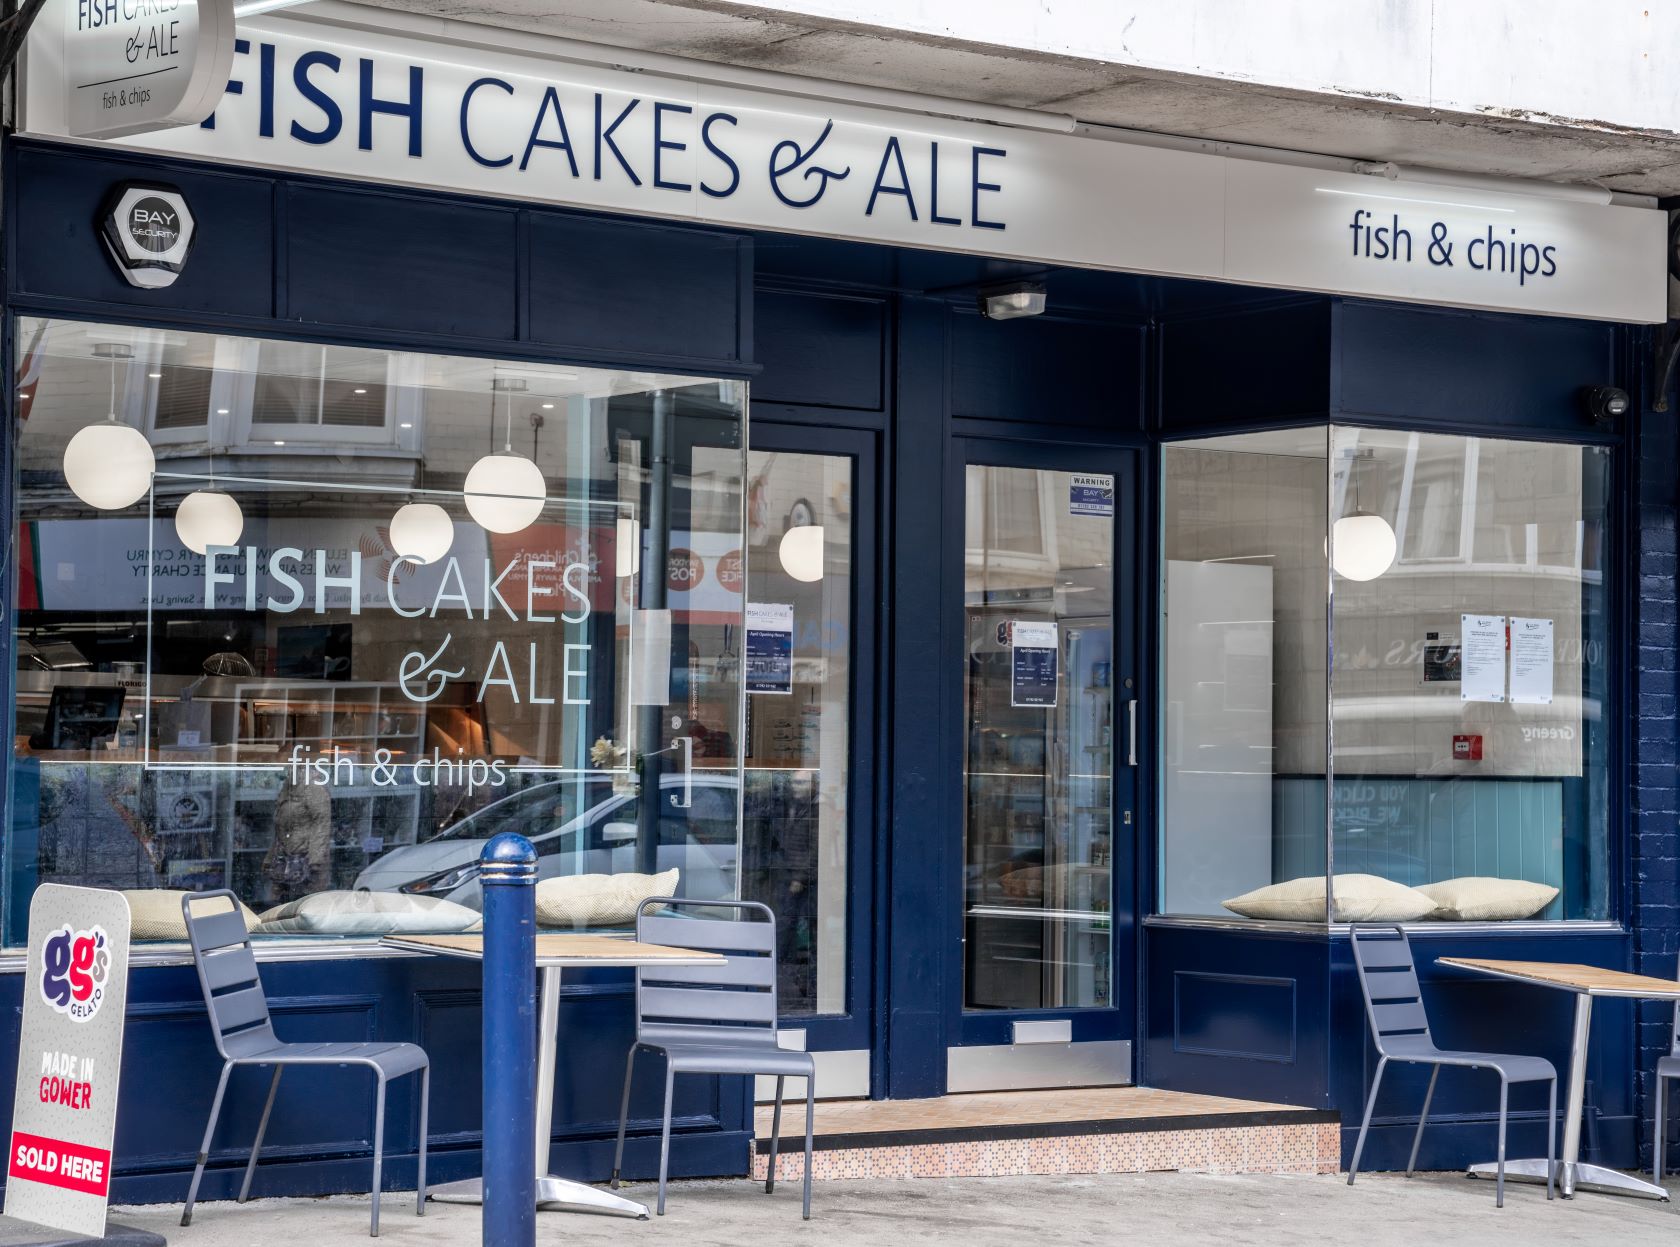 Fish Cakes & Ale Takeaway in Mumbles, Wales